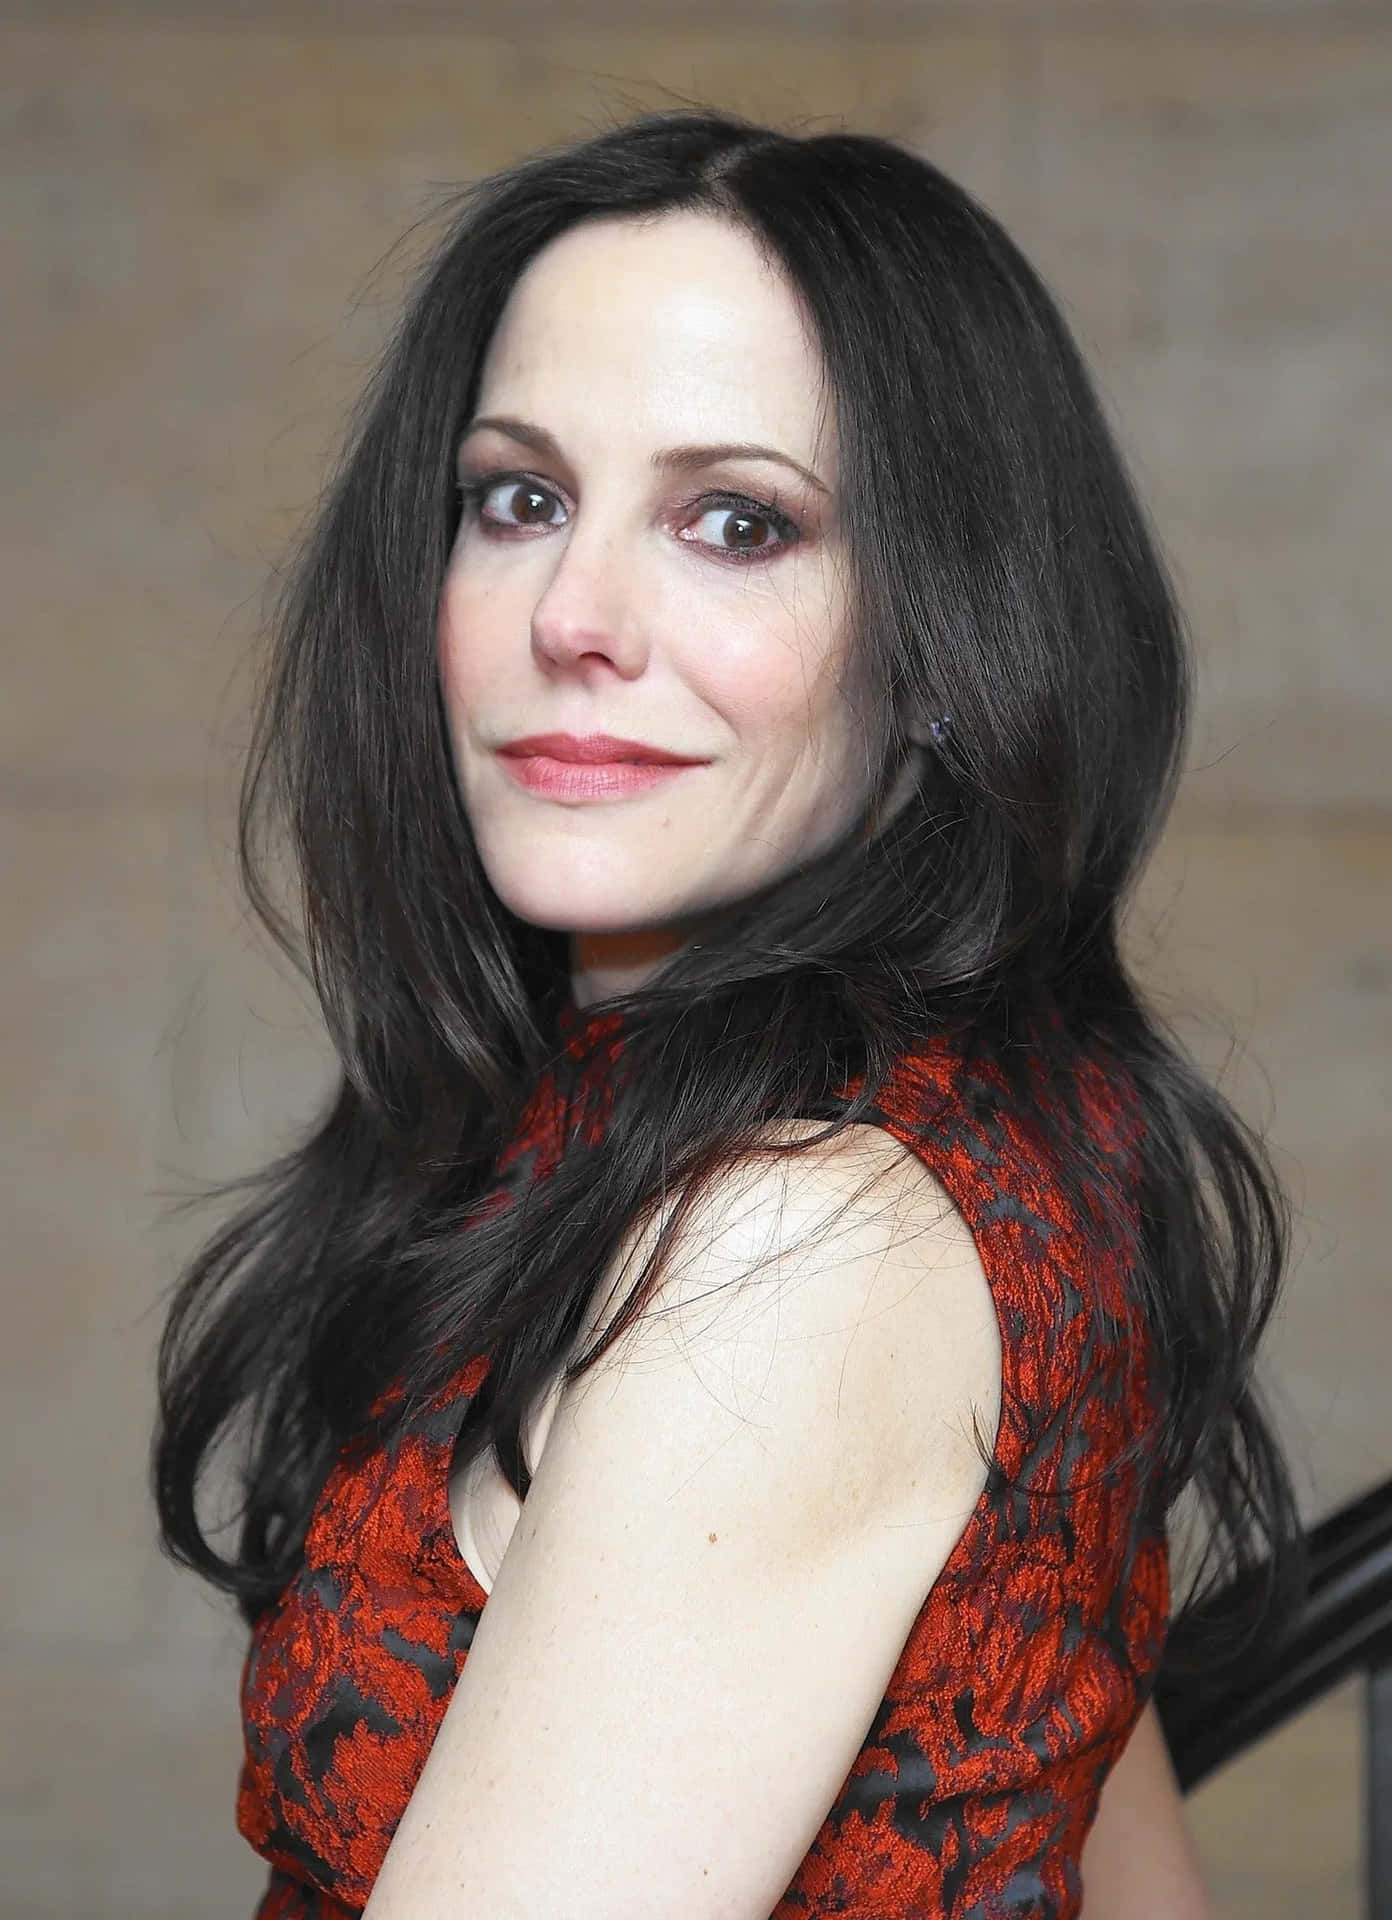 Mary Louise Parker posing for a professional photoshoot Wallpaper